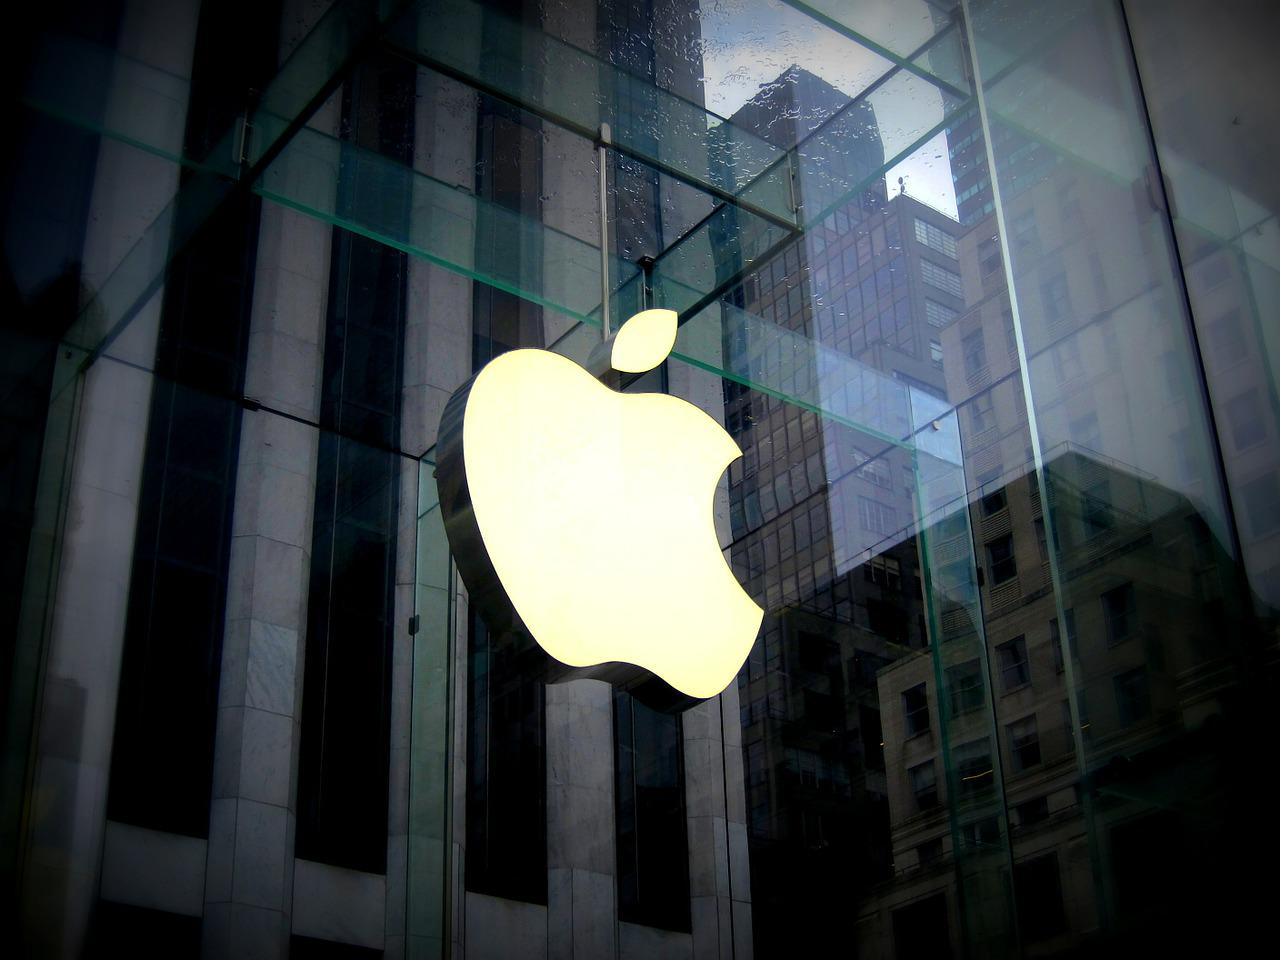 Texas federal court rules Apple owes $300M in patent infringement case